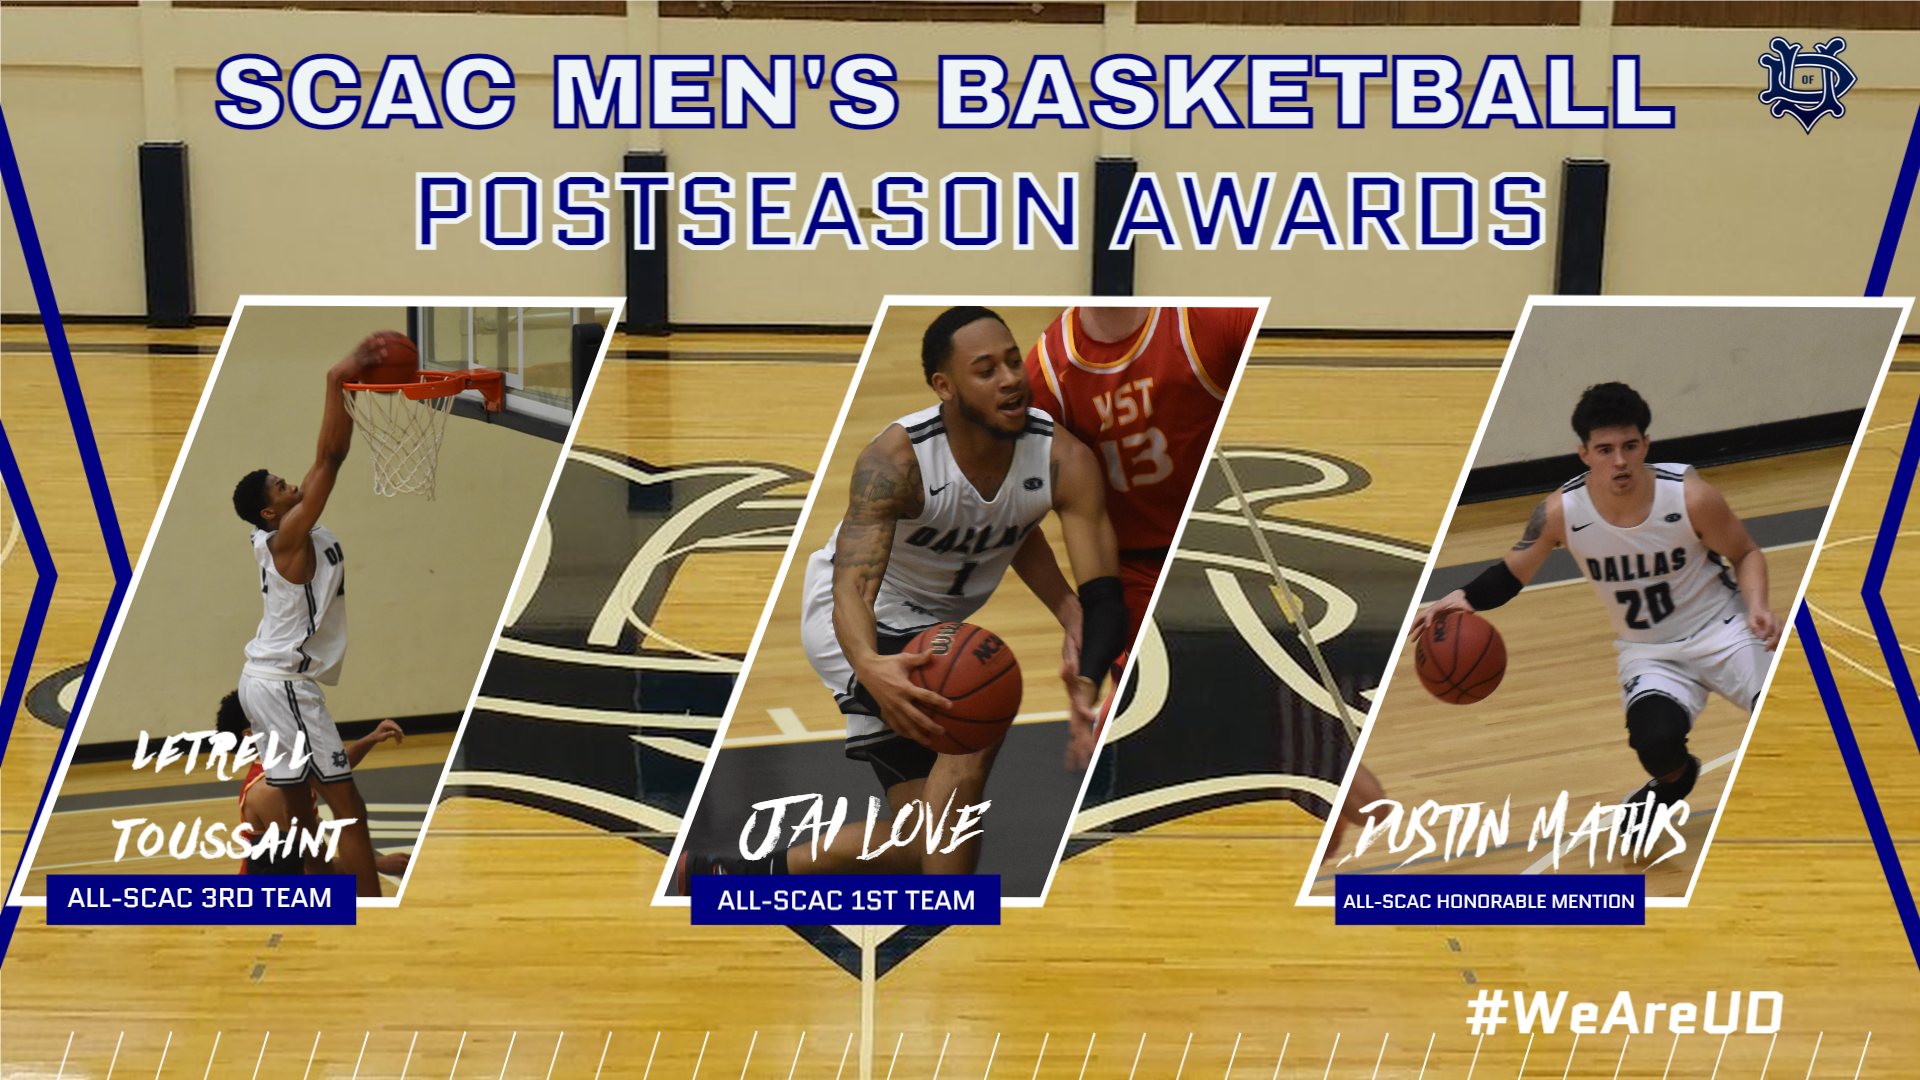 Love Headlines All-SCAC Honors with 1st Team Selection; Toussaint tabbed 3rd Team